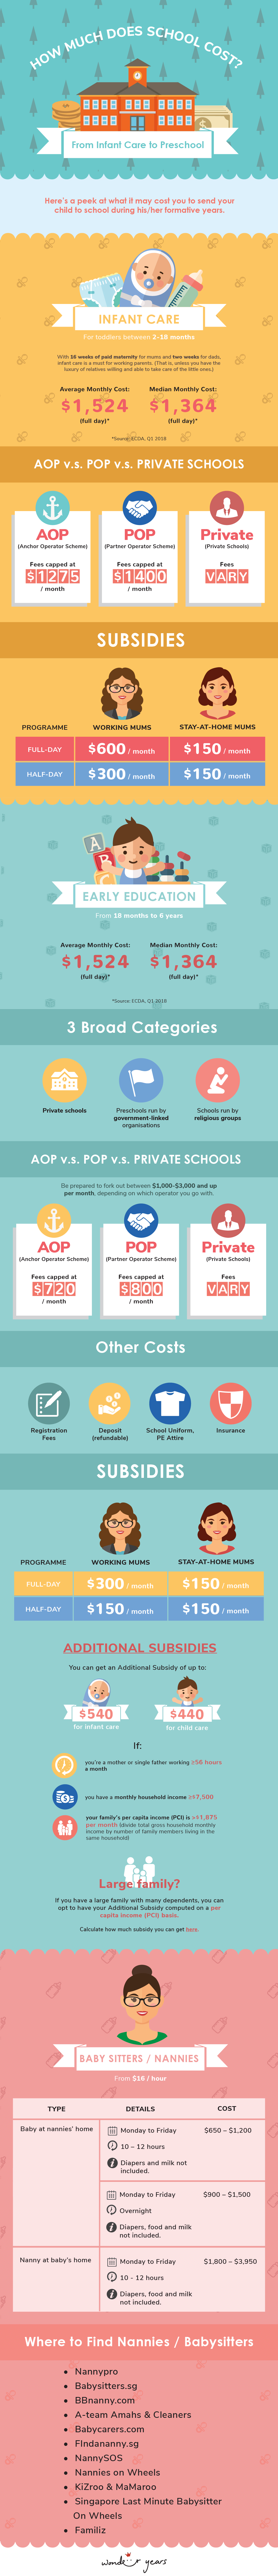 how much does school cost infographic